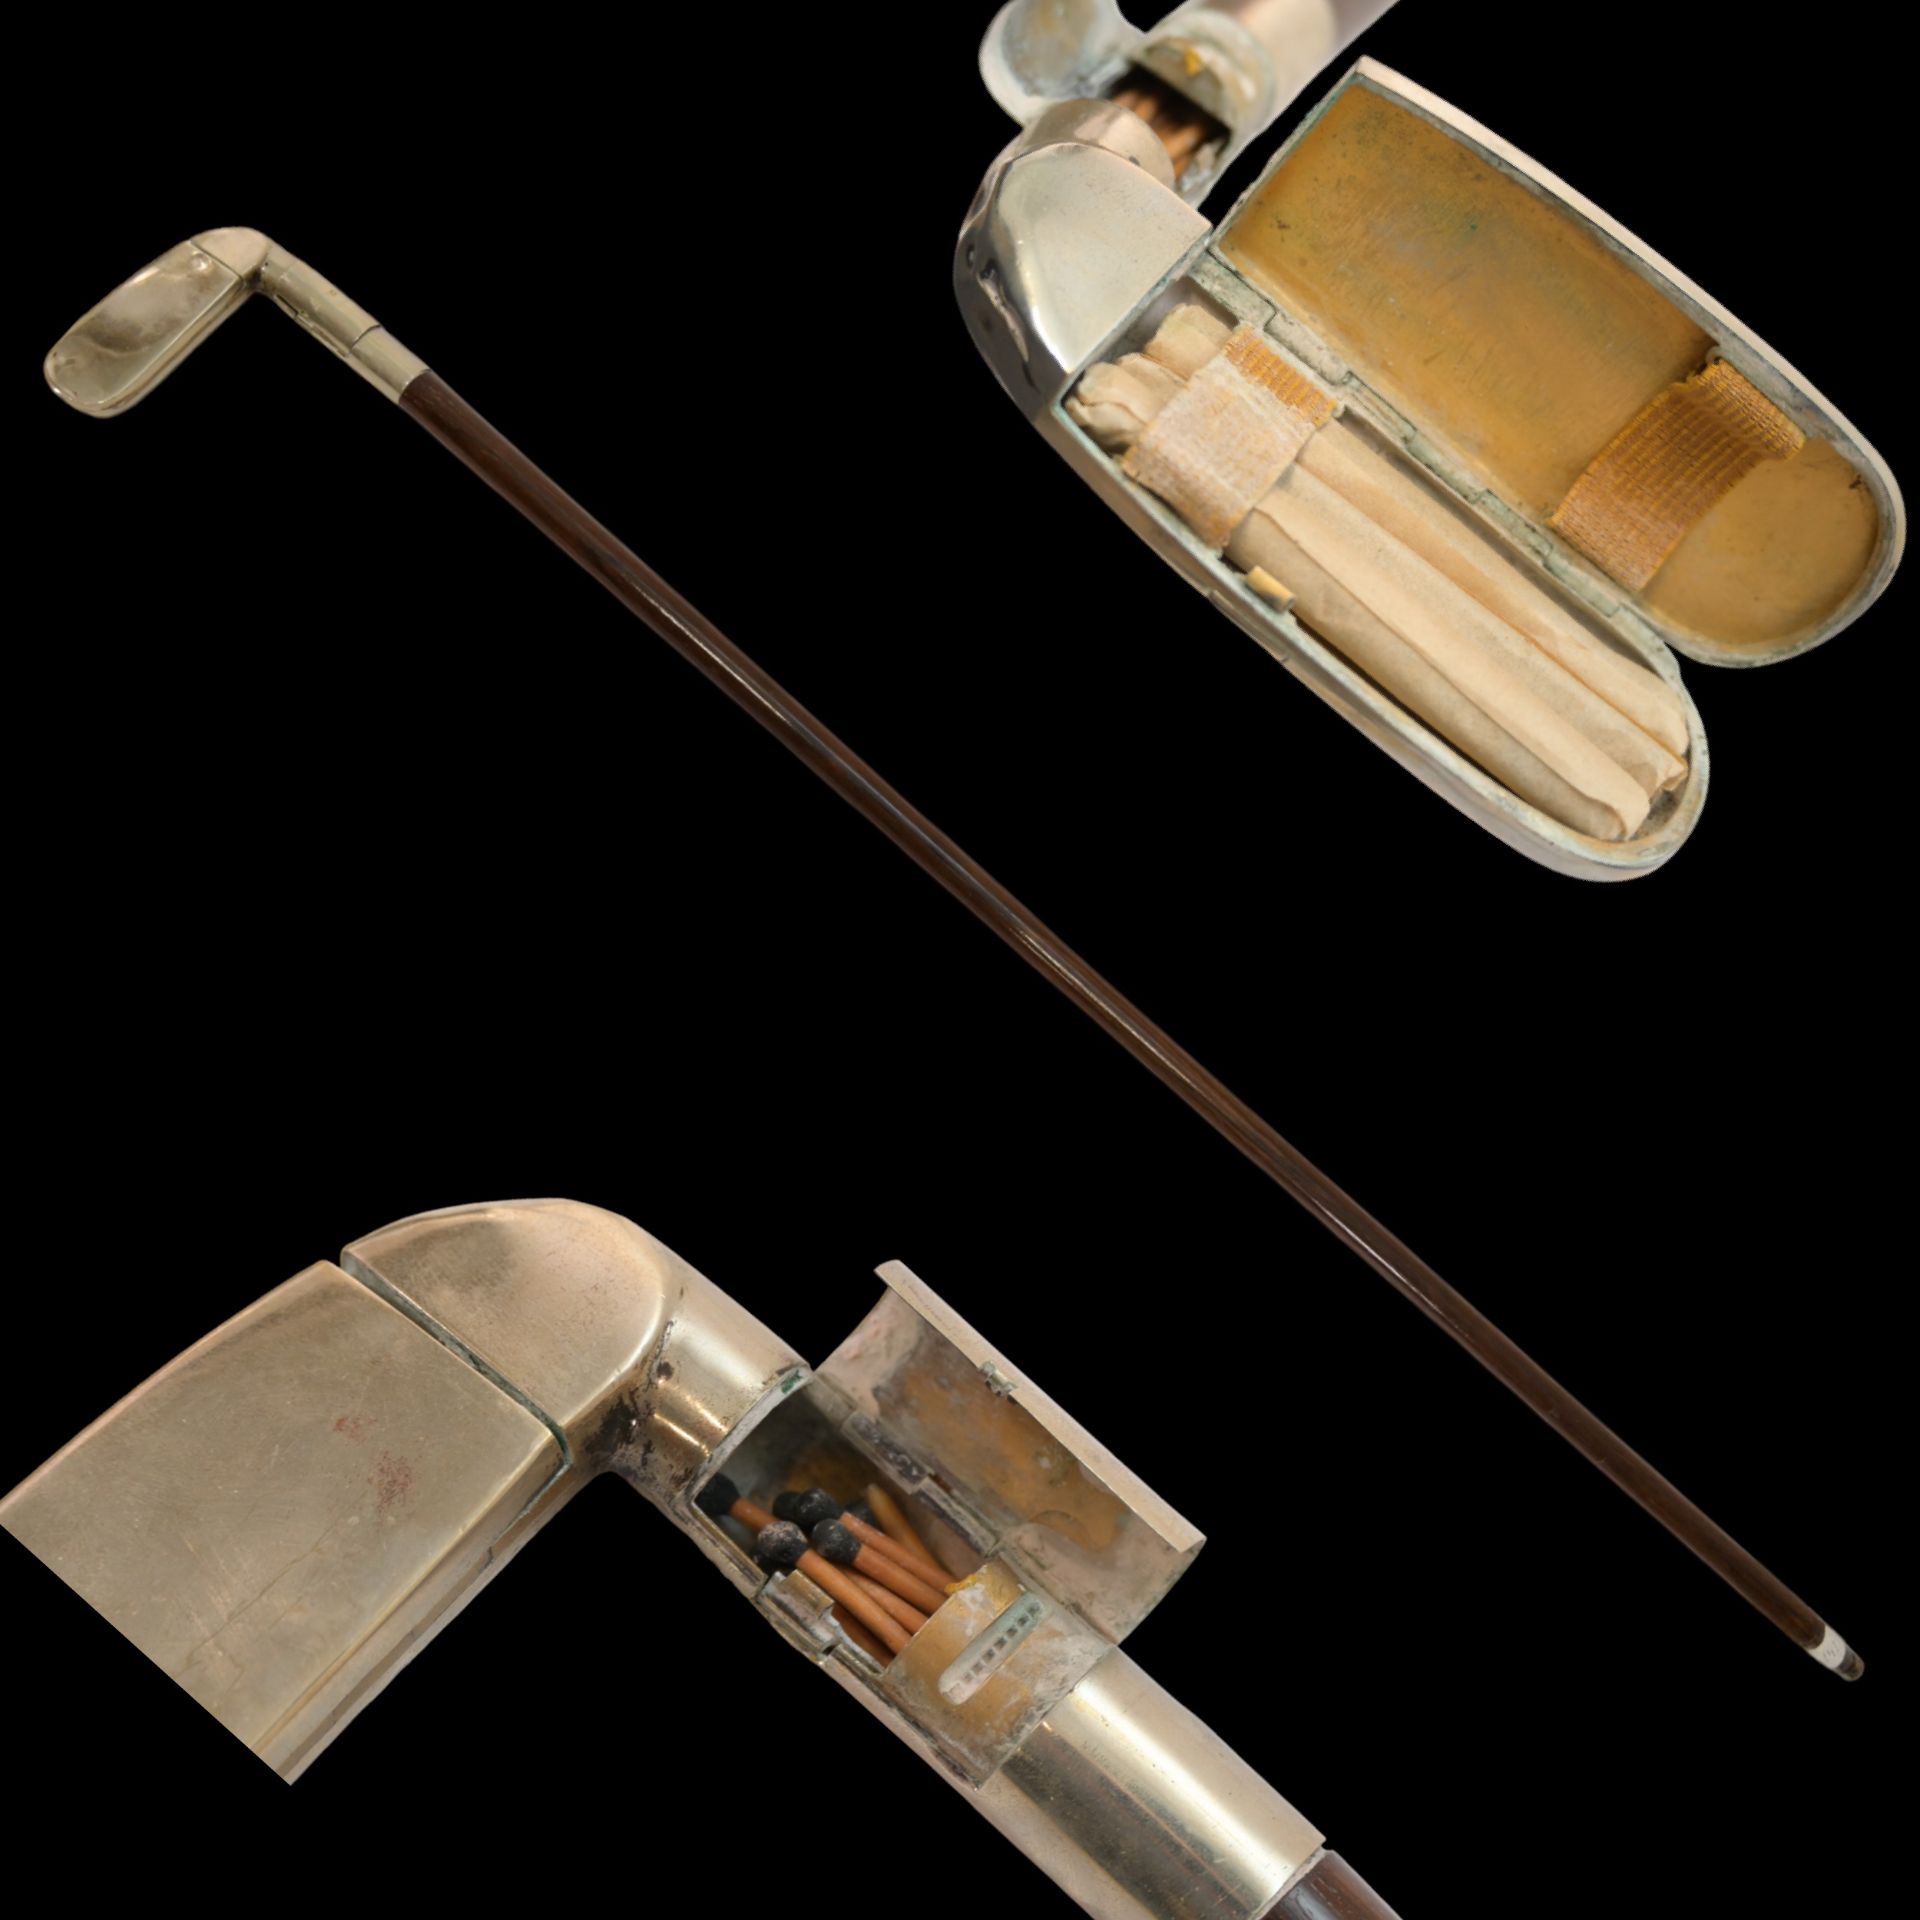 A rare Golfclub Walking Stick Cane, Cigarette Case with Match Safe, early 20th century.